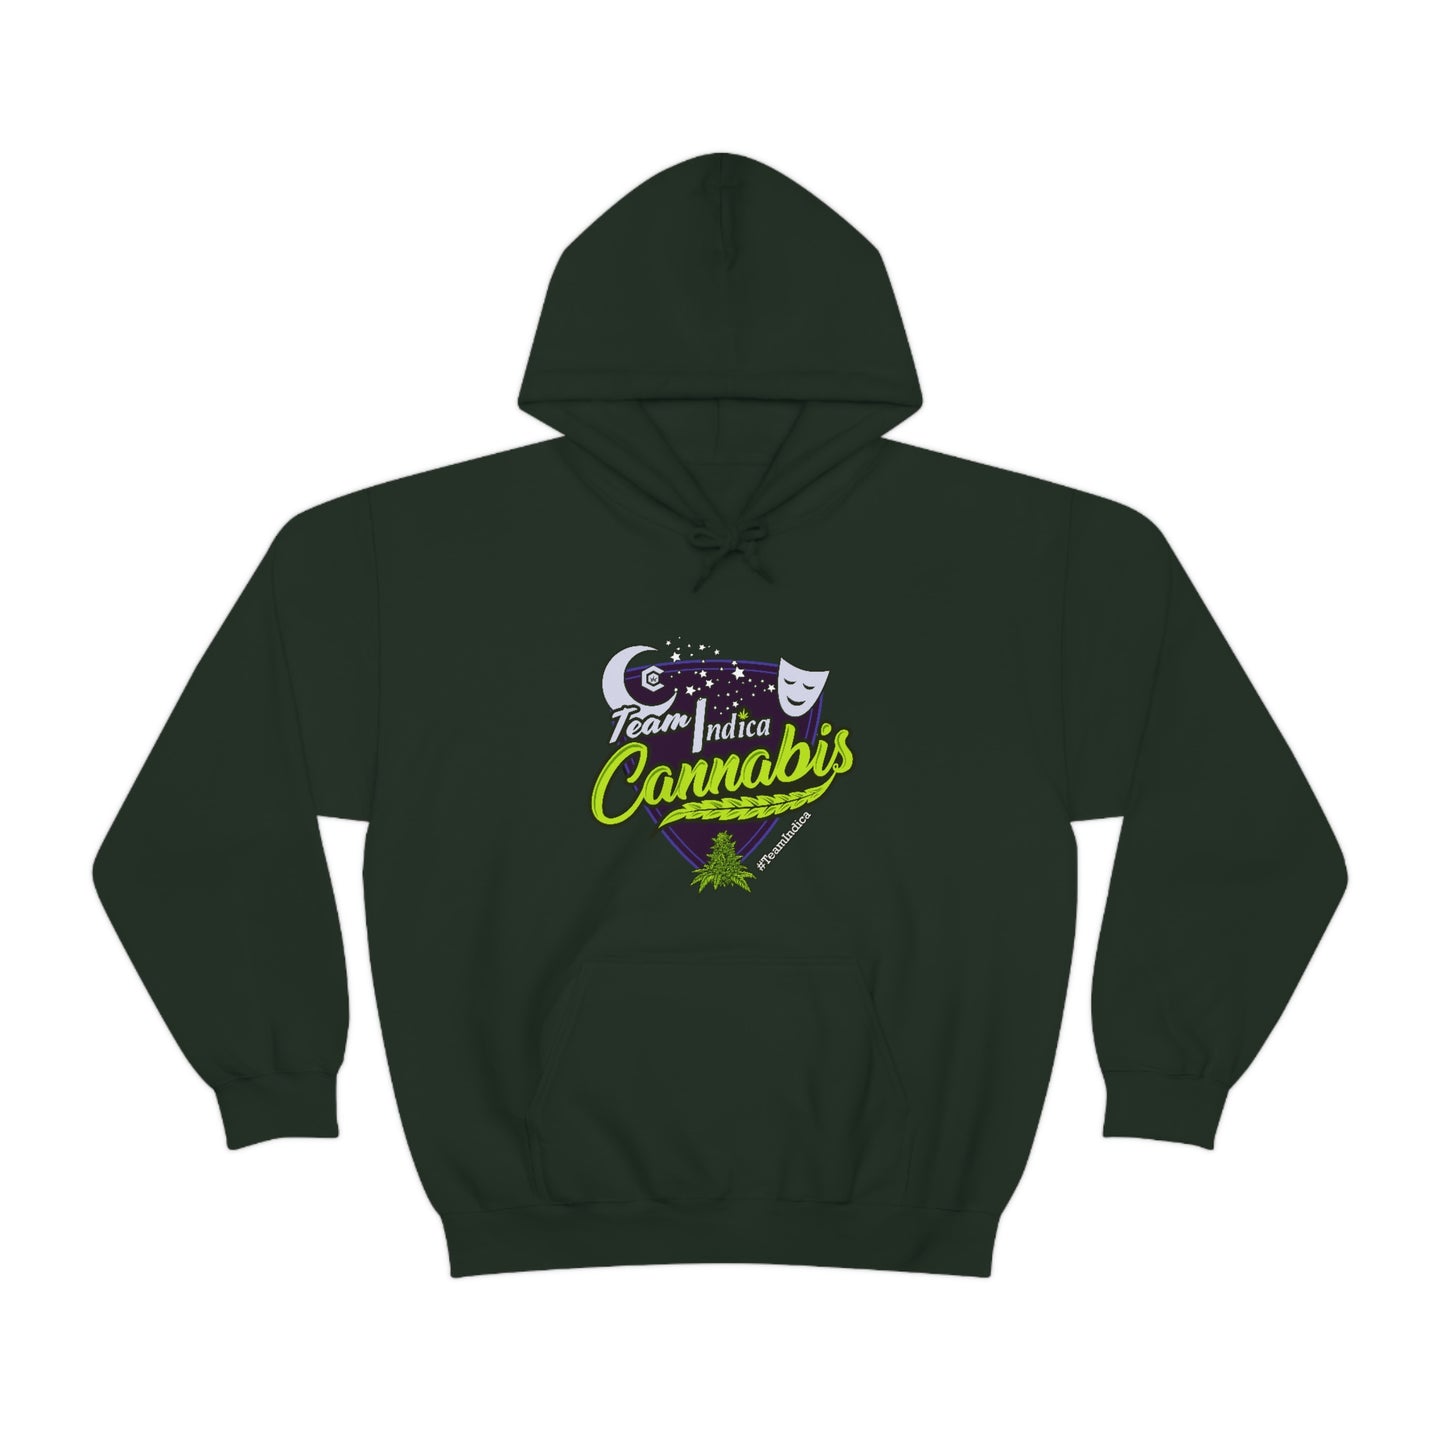 a green hooded sweatshirt with the word 'Team Indica Cannabis Pullover' on it.